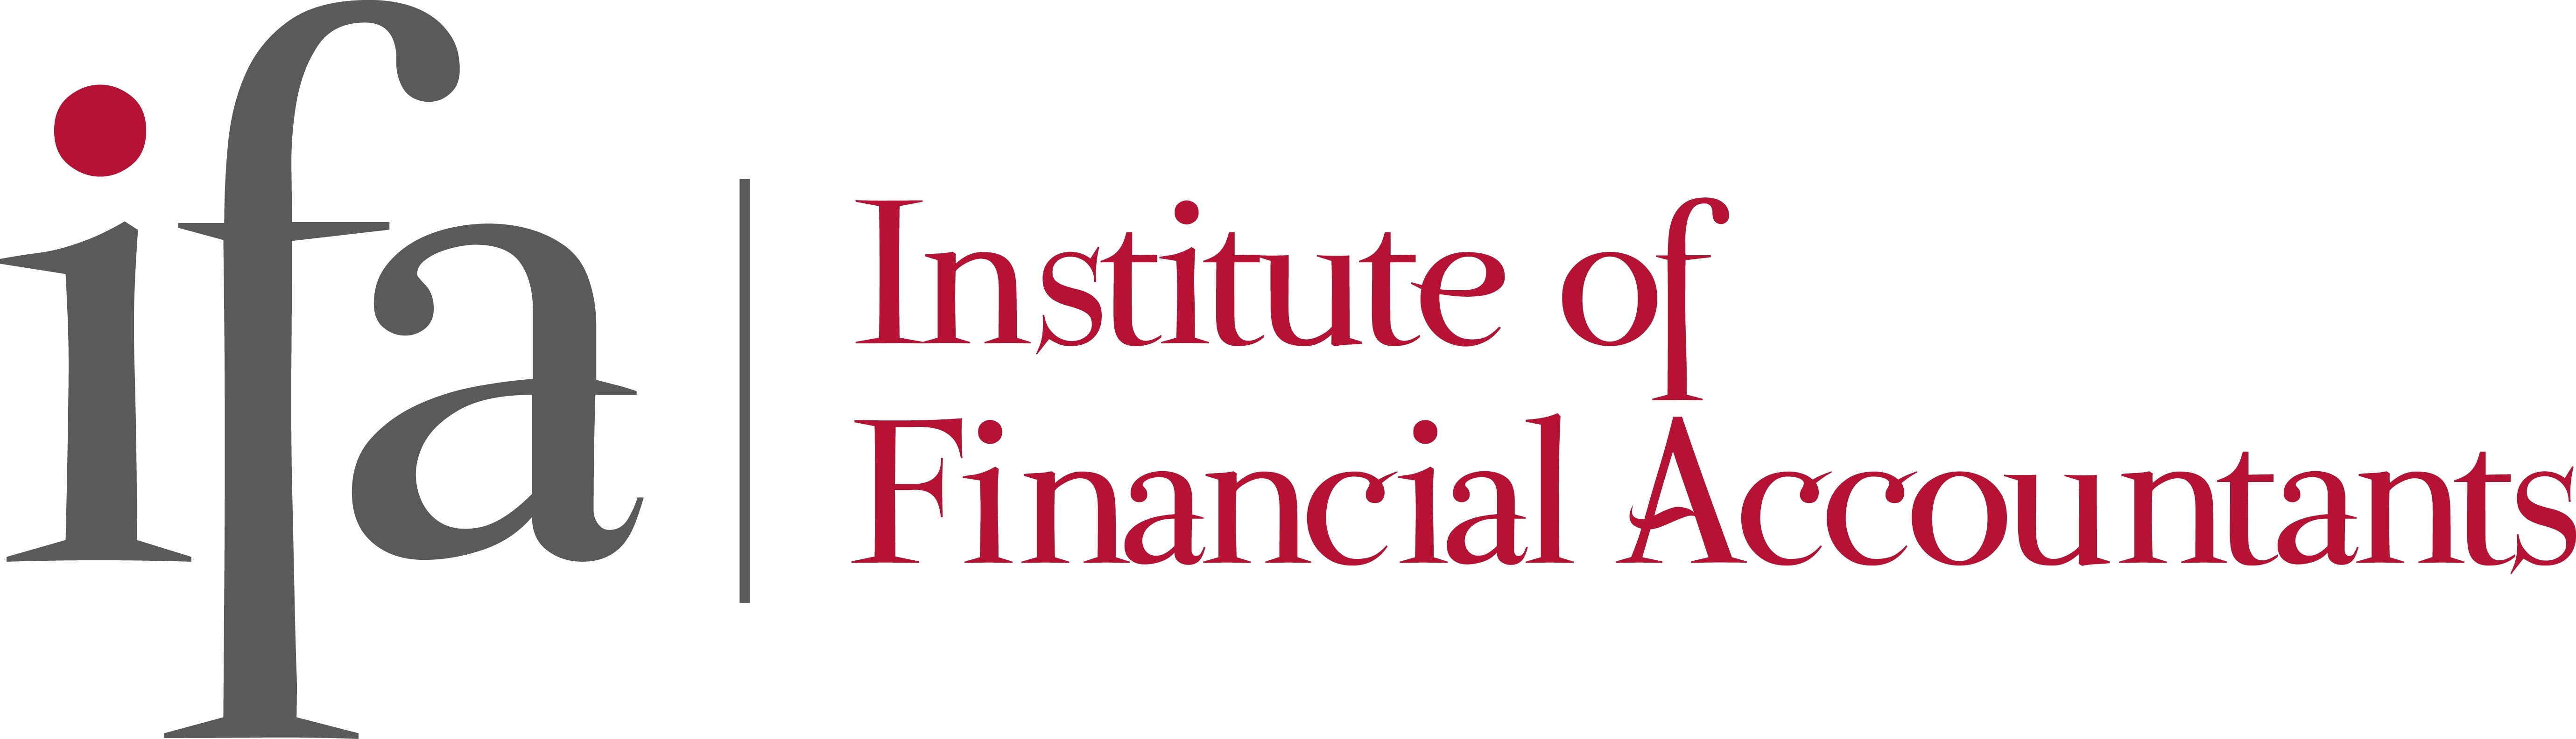 Institute of financial accountants